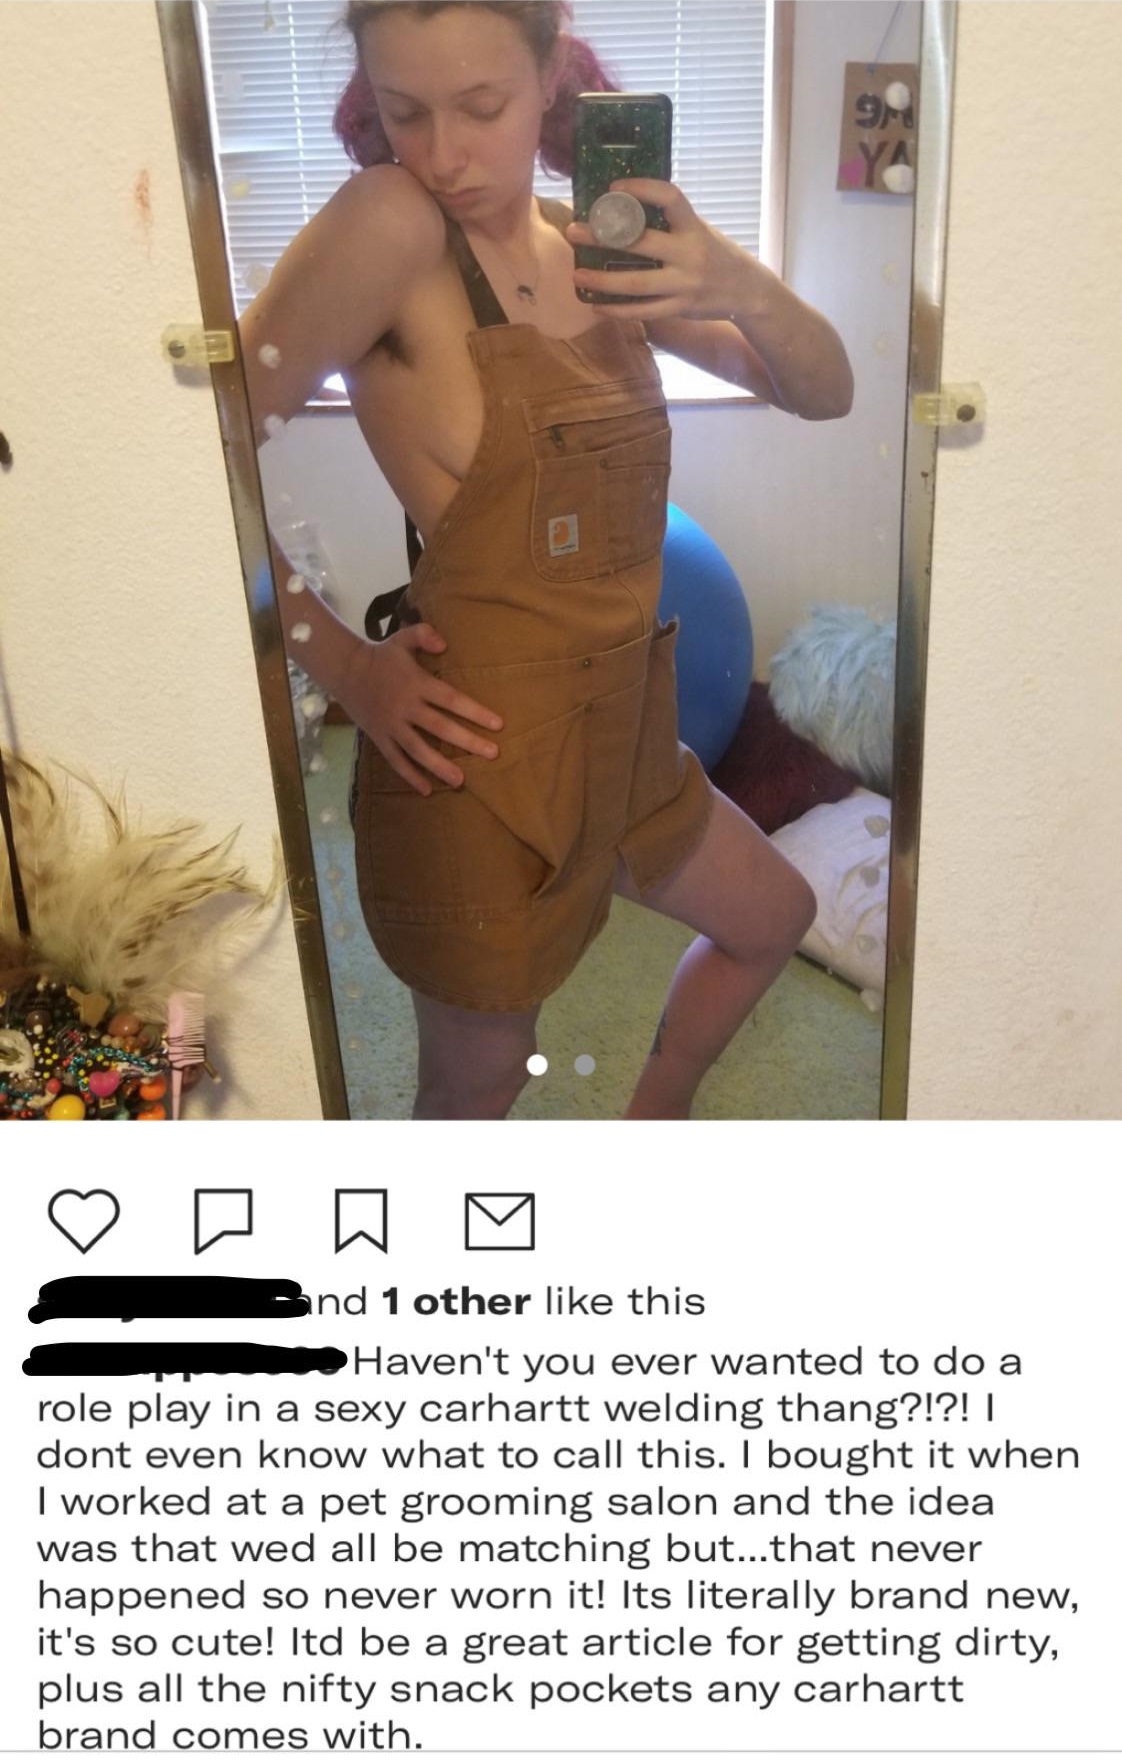 Haven't you ever wanted to do a role play in a sexy carhartt welding thang?!?! | dont even know what to call this. I bought it when I worked at a pet grooming salon and the idea was that wed all be matching but...that never ha